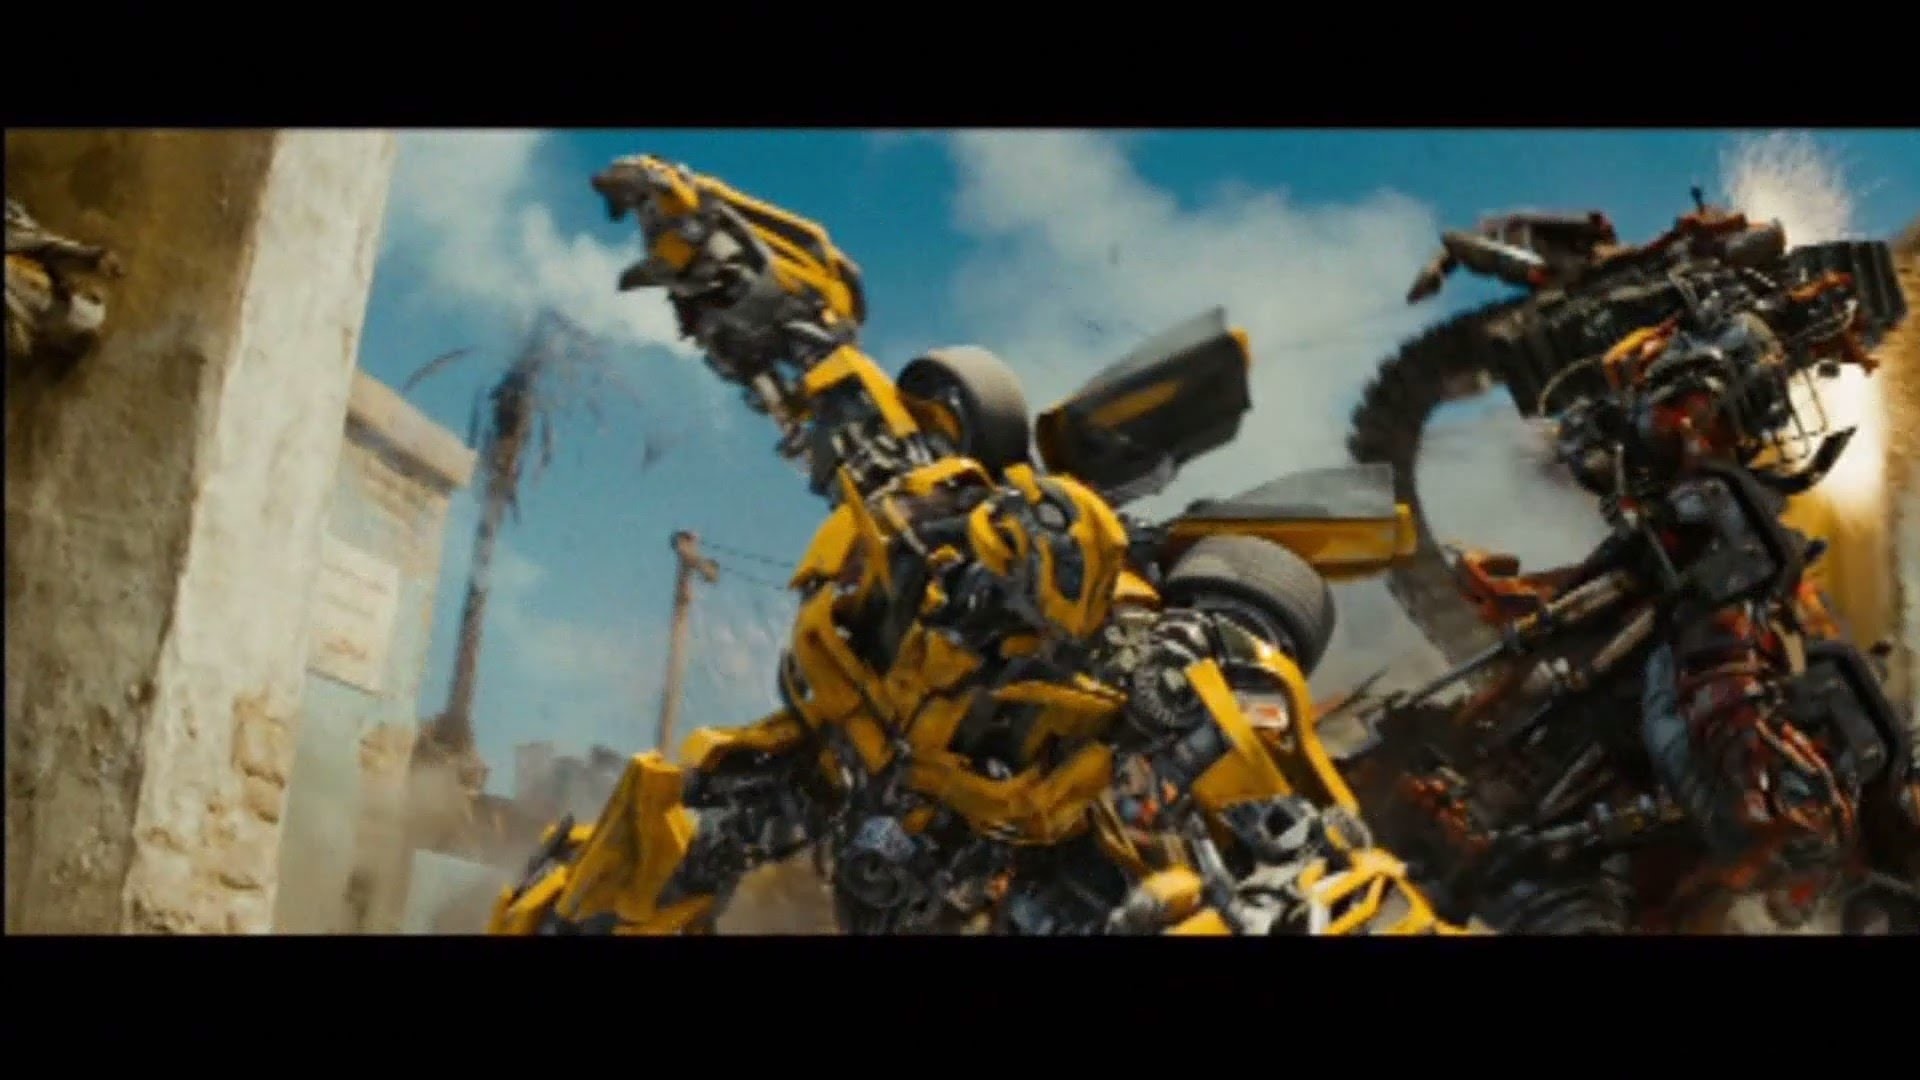 1920x1080 Title : transformers revenge of the fallen bumblebee vs rampage and ravage.  Dimension : 1920 x 1080. File Type : JPG/JPEG